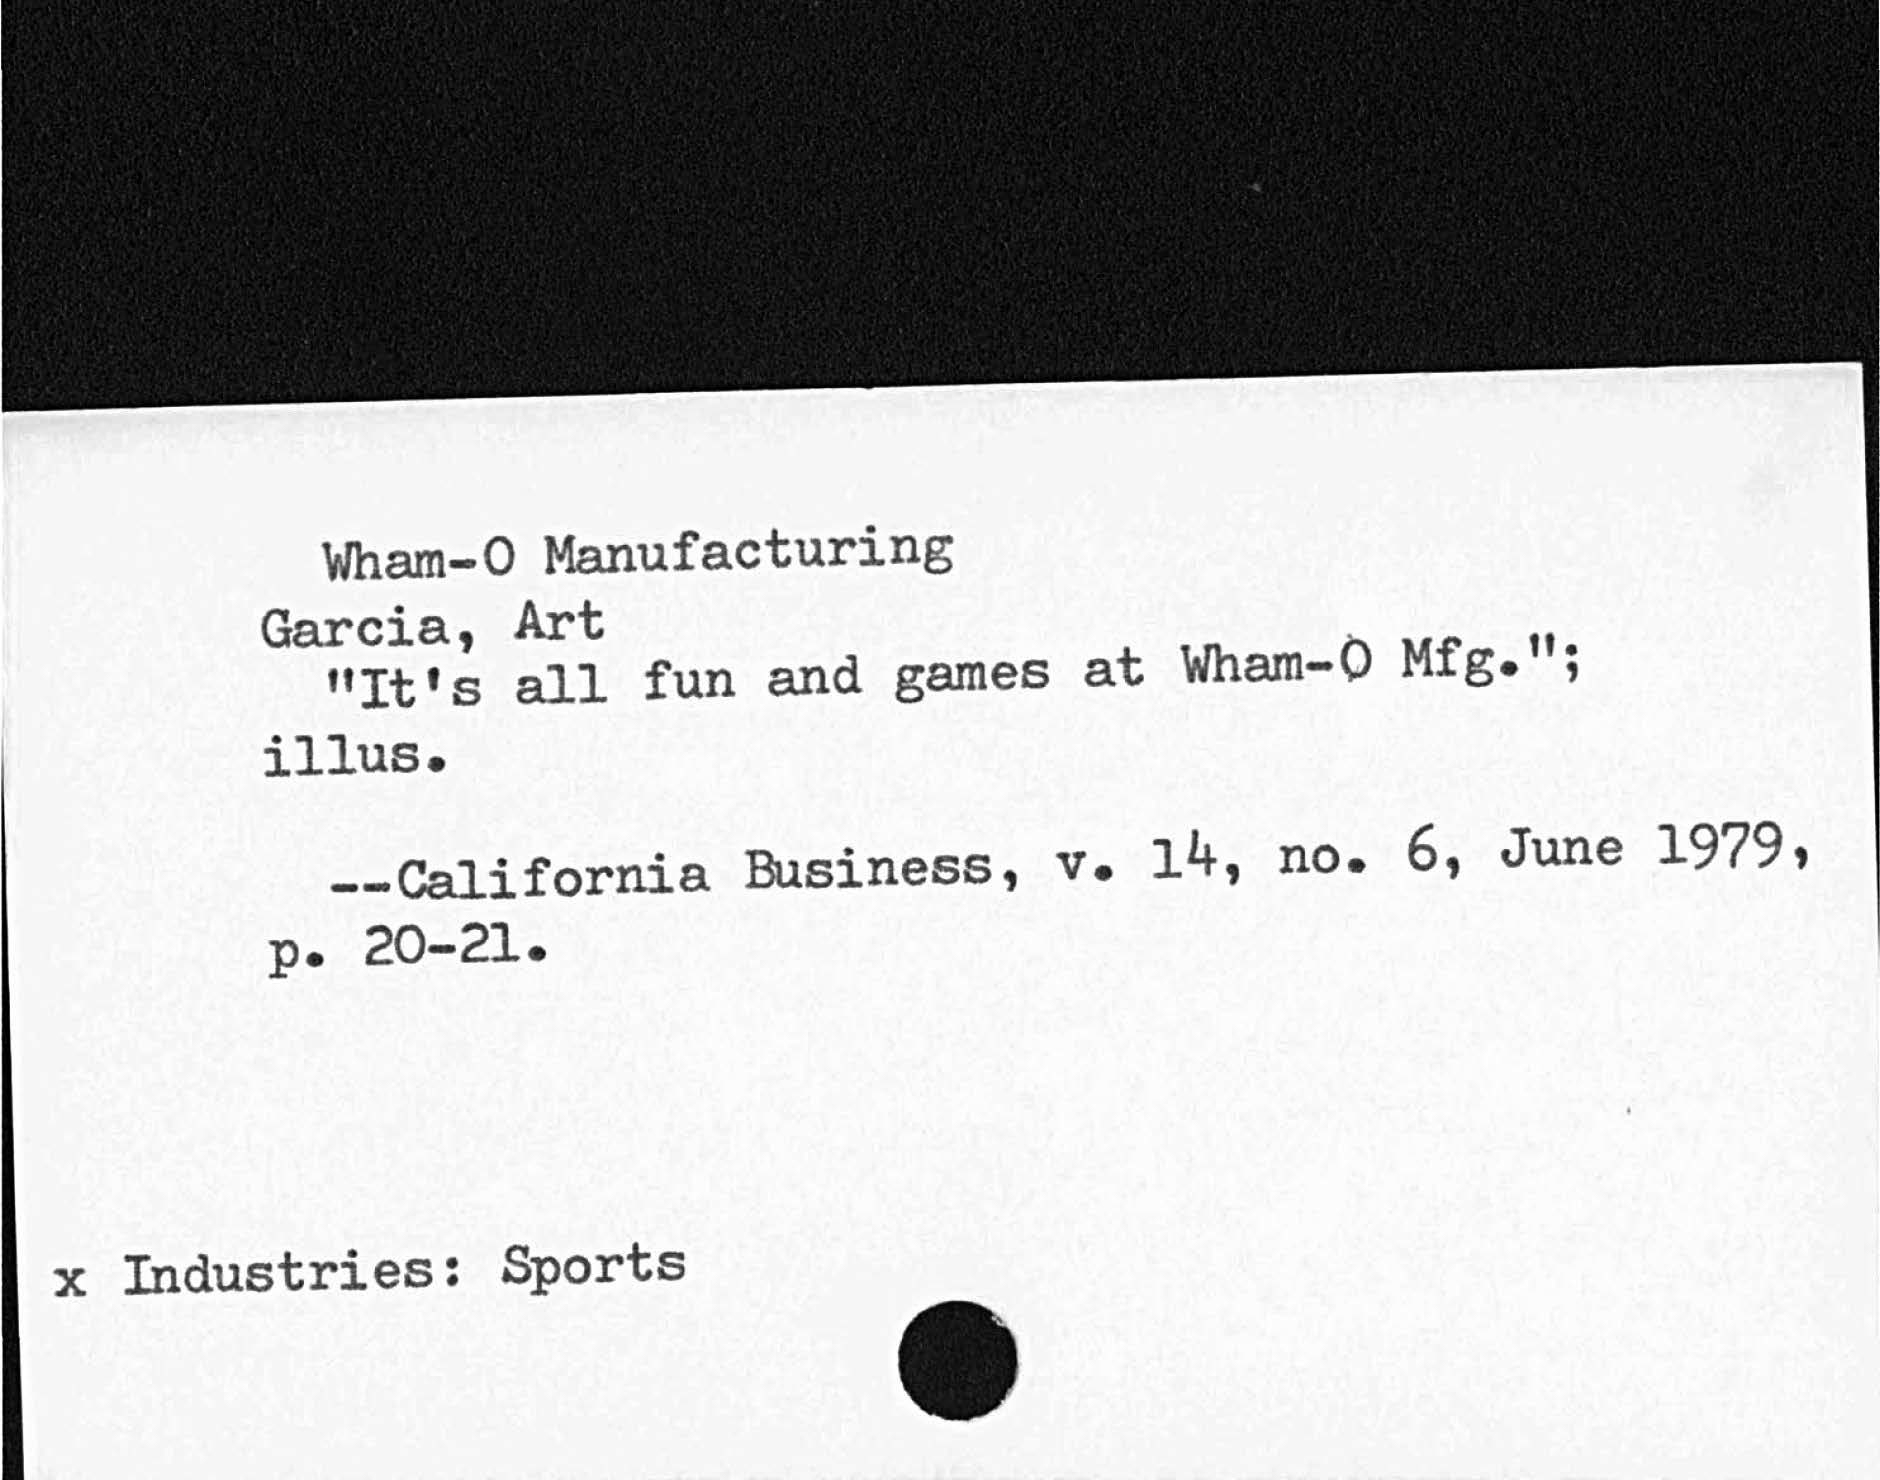 Wham- 0 ManufacturingGarcia, ArtIt's all fun and games at Wham 0 Mfg.illus.California Business, v. 14, no. 6, June 1979,x Industries:  Sports   P20- 21.